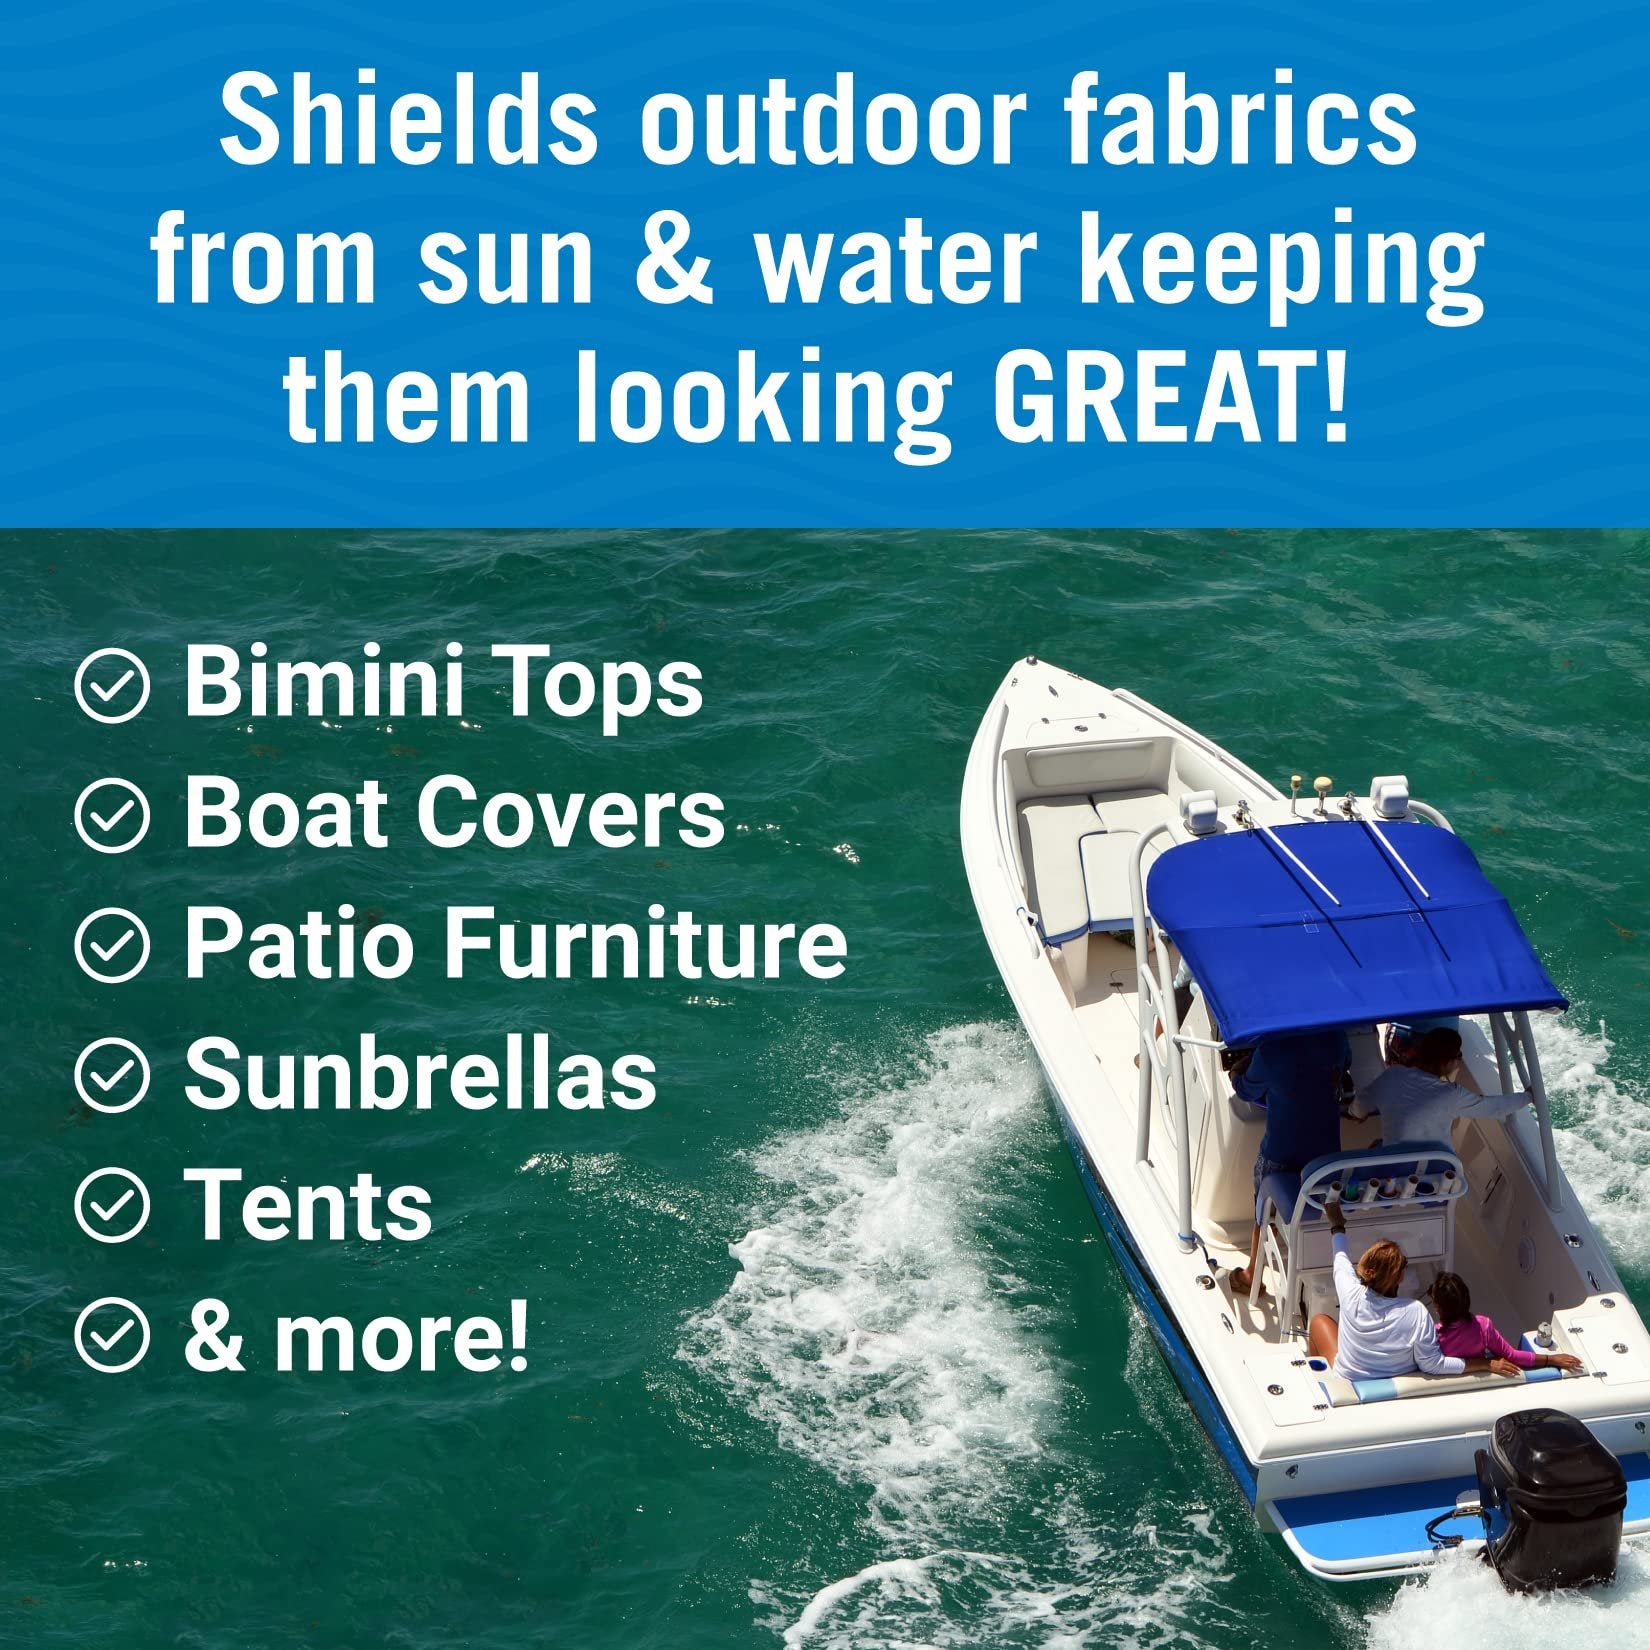 Fabric Waterproof Spray Heavy Duty Waterproofing Spray Fabric Protector Spray and Repellent for Outdoor Marine Canvas Boat Tops, Vinyl Seats, Tent Water Proof,Clothing Boots, Jacket and Clothes